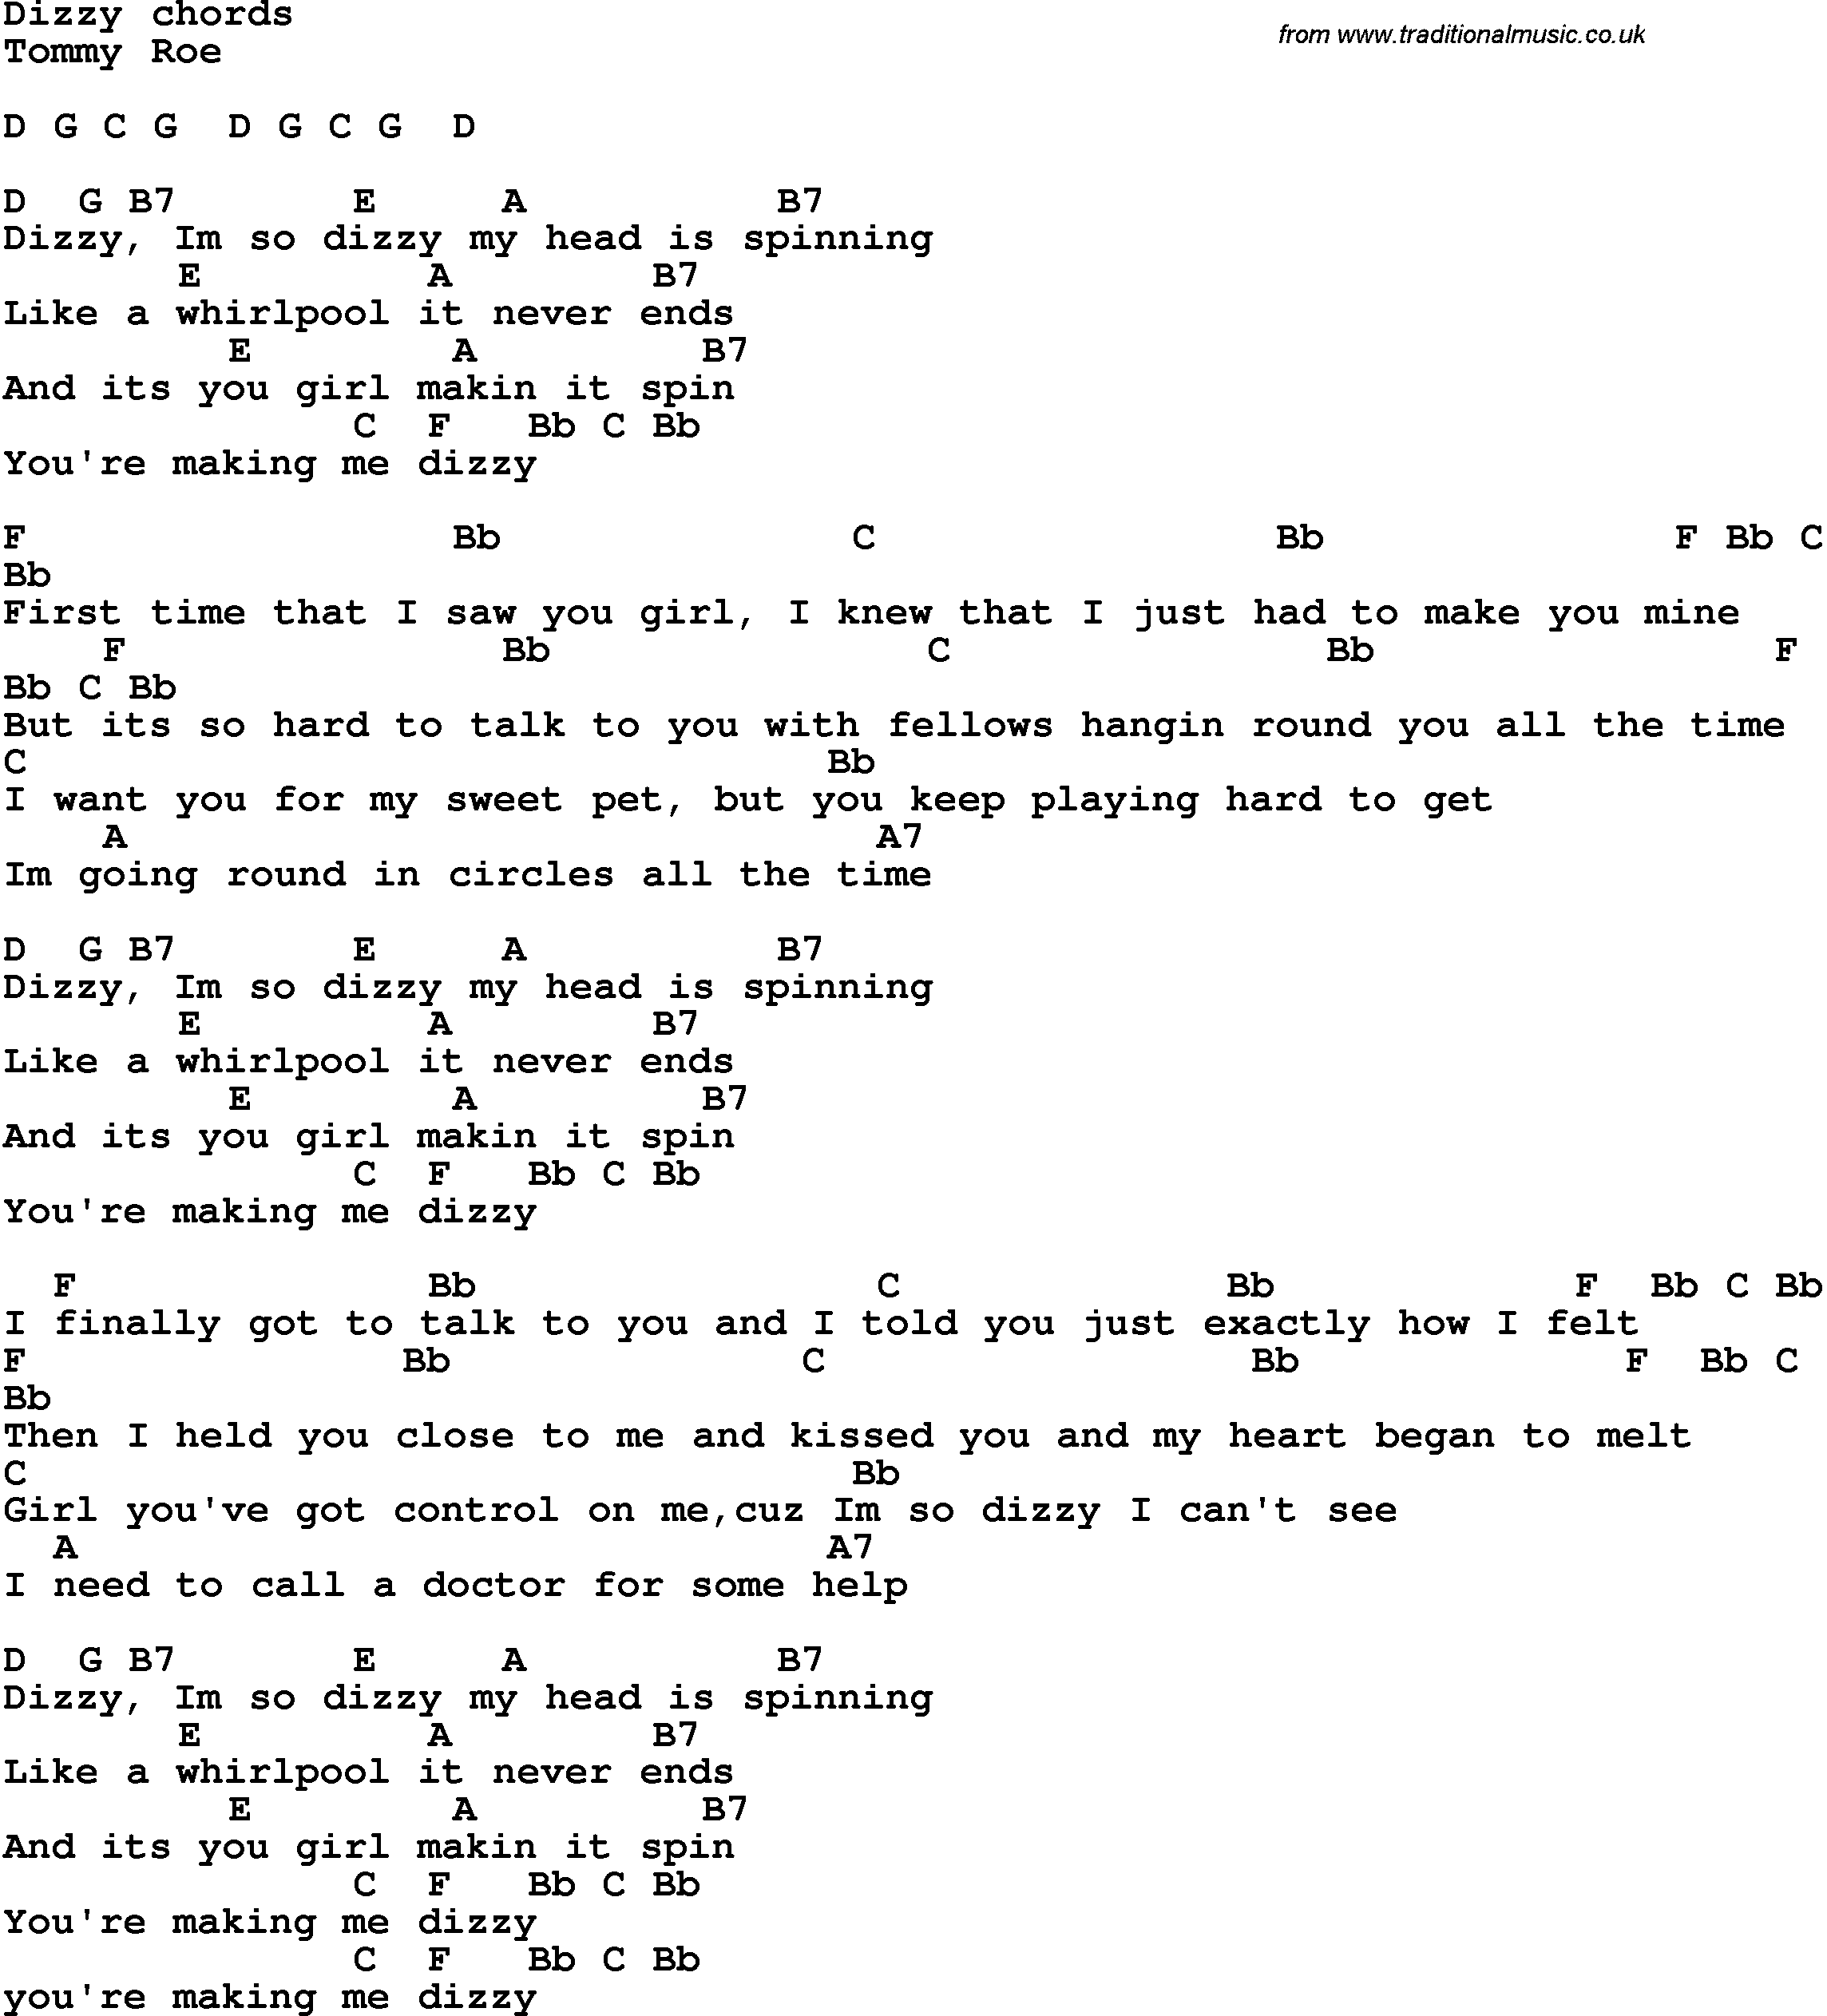 Song Lyrics with guitar chords for Dizzy